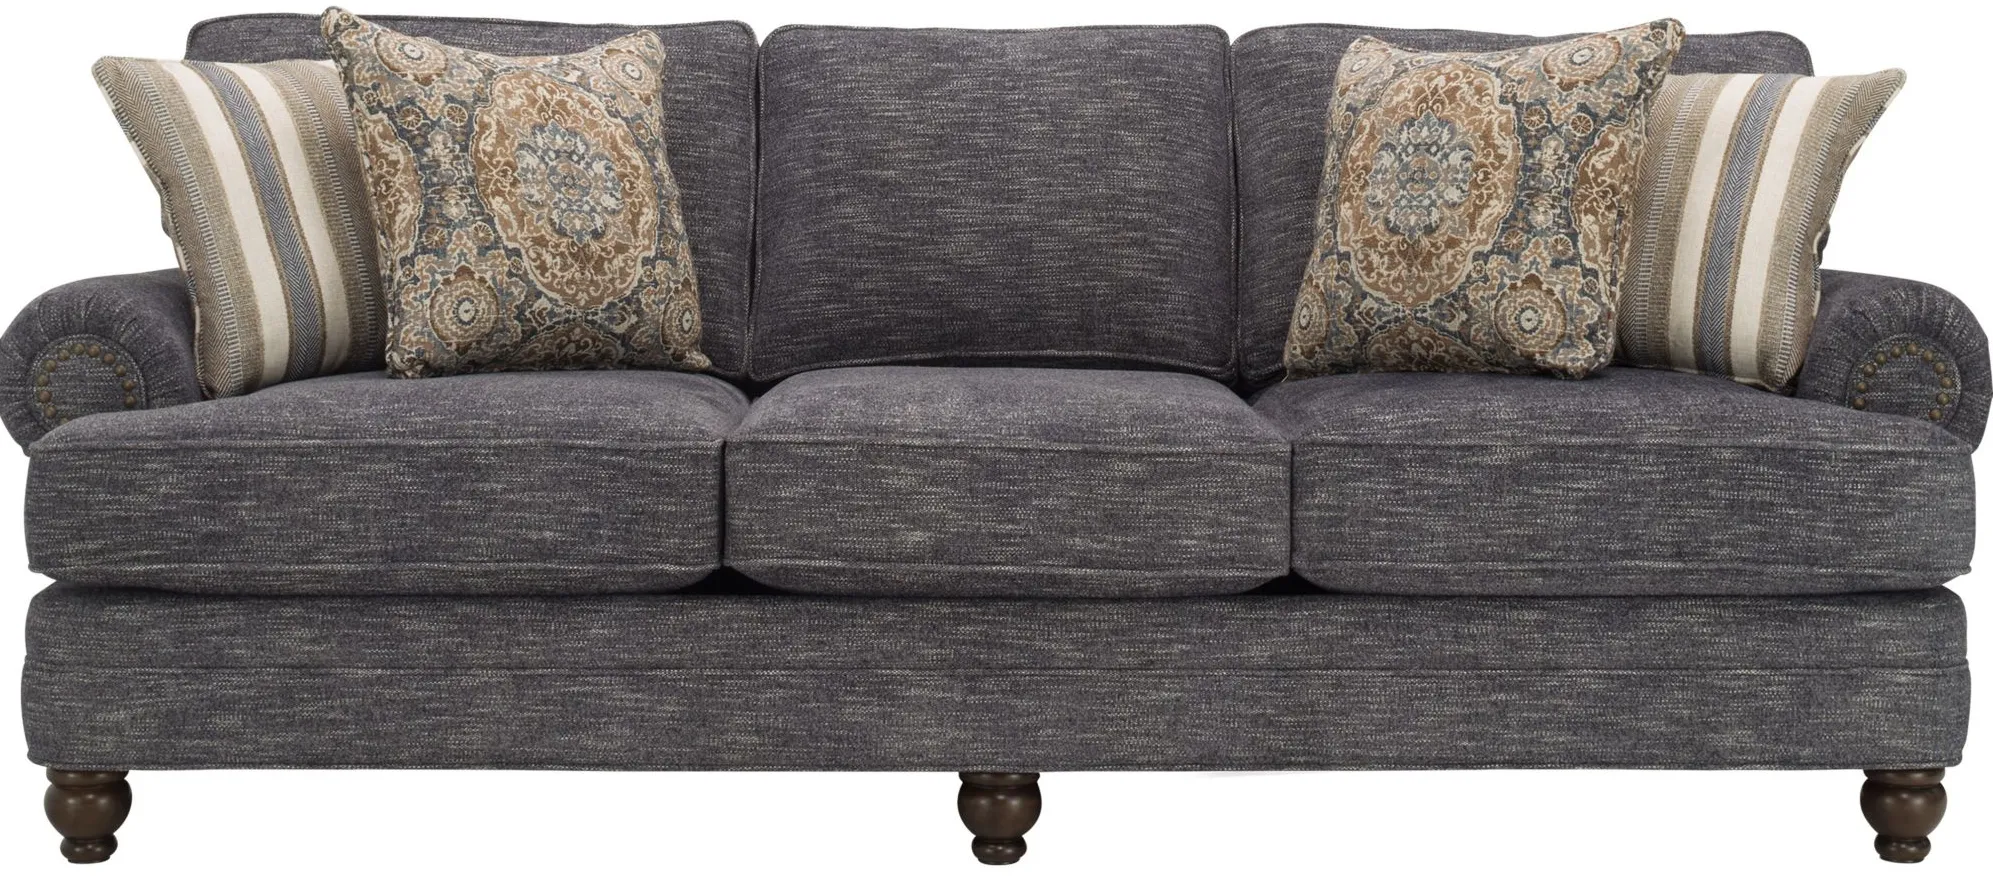 Tifton Chenille Sofa in Handwoven Blue Smoke by H.M. Richards